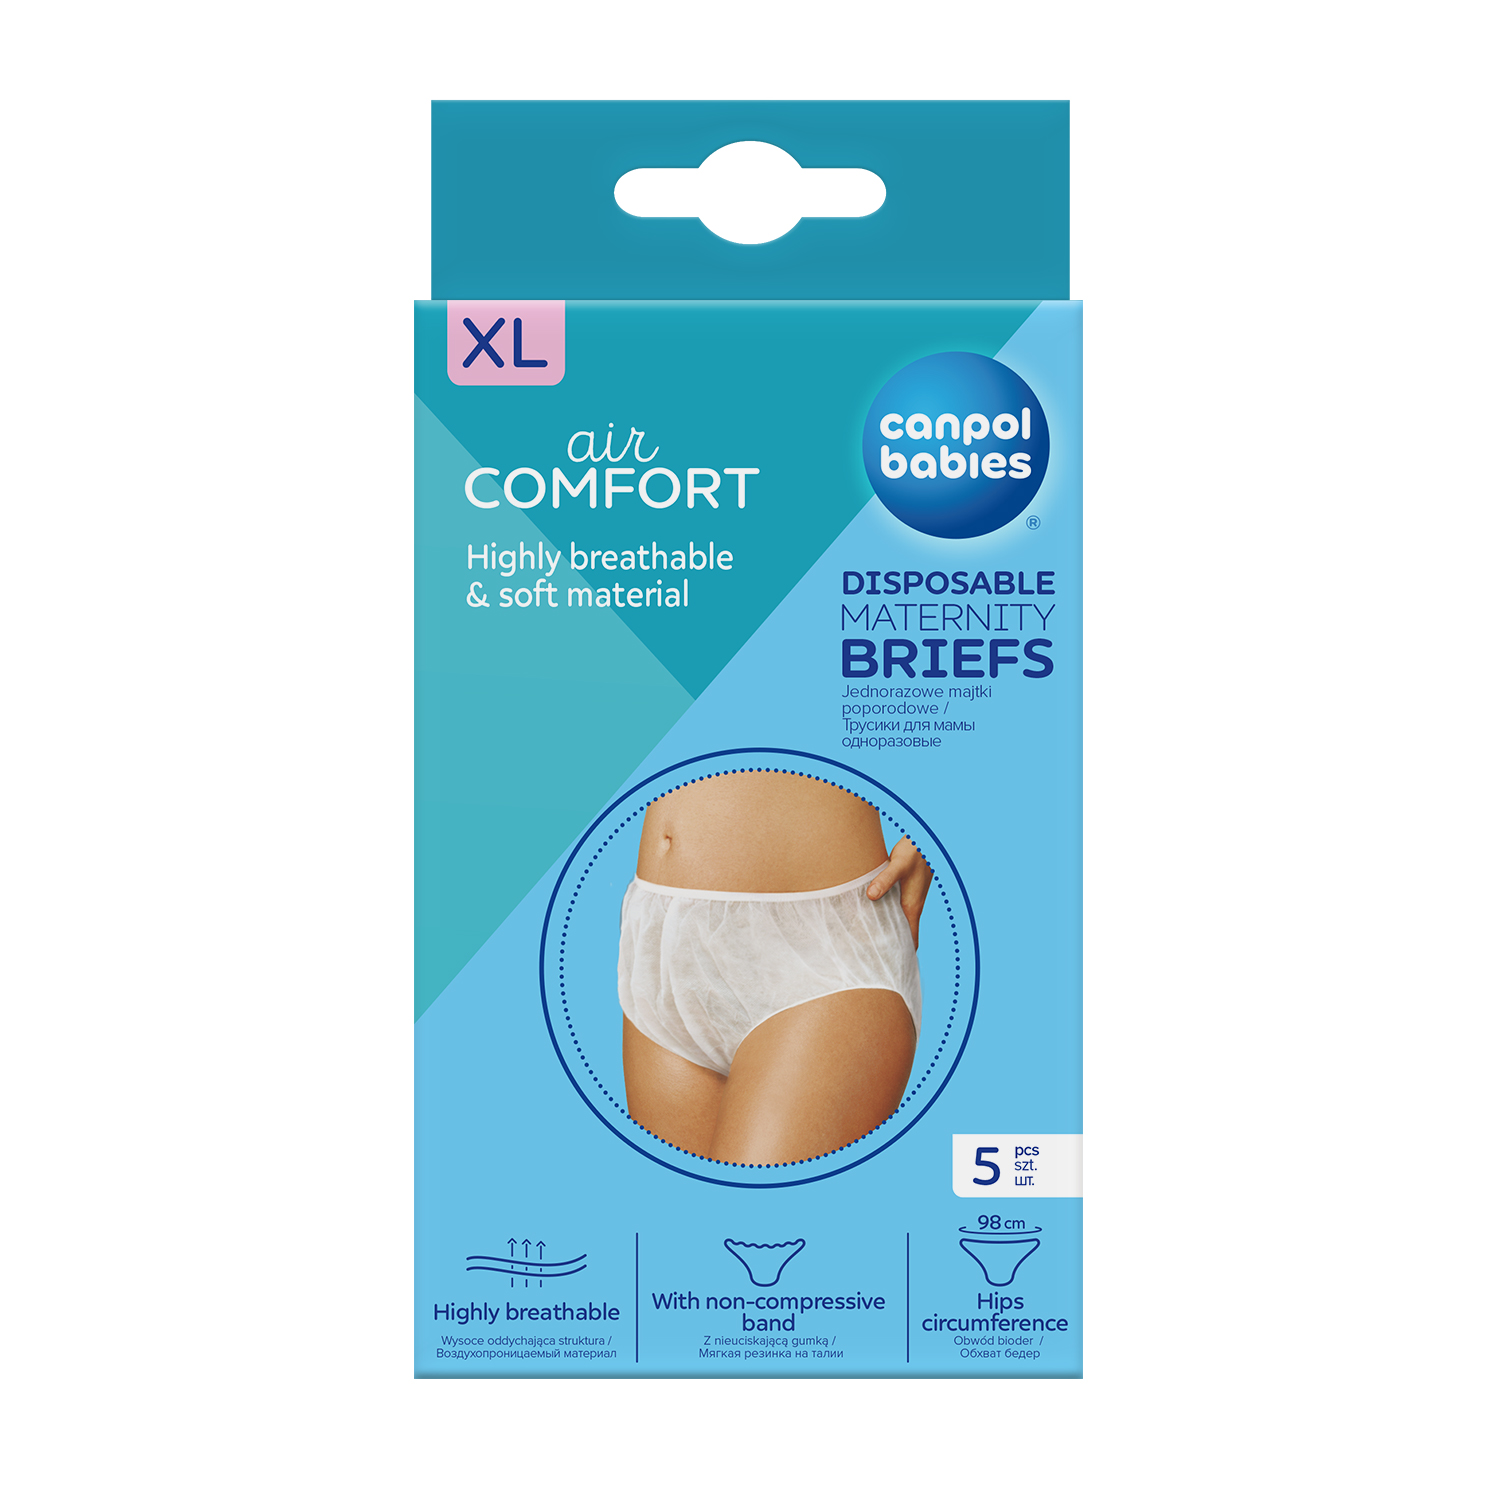 Disposable Briefs & Pads - MATERNITY